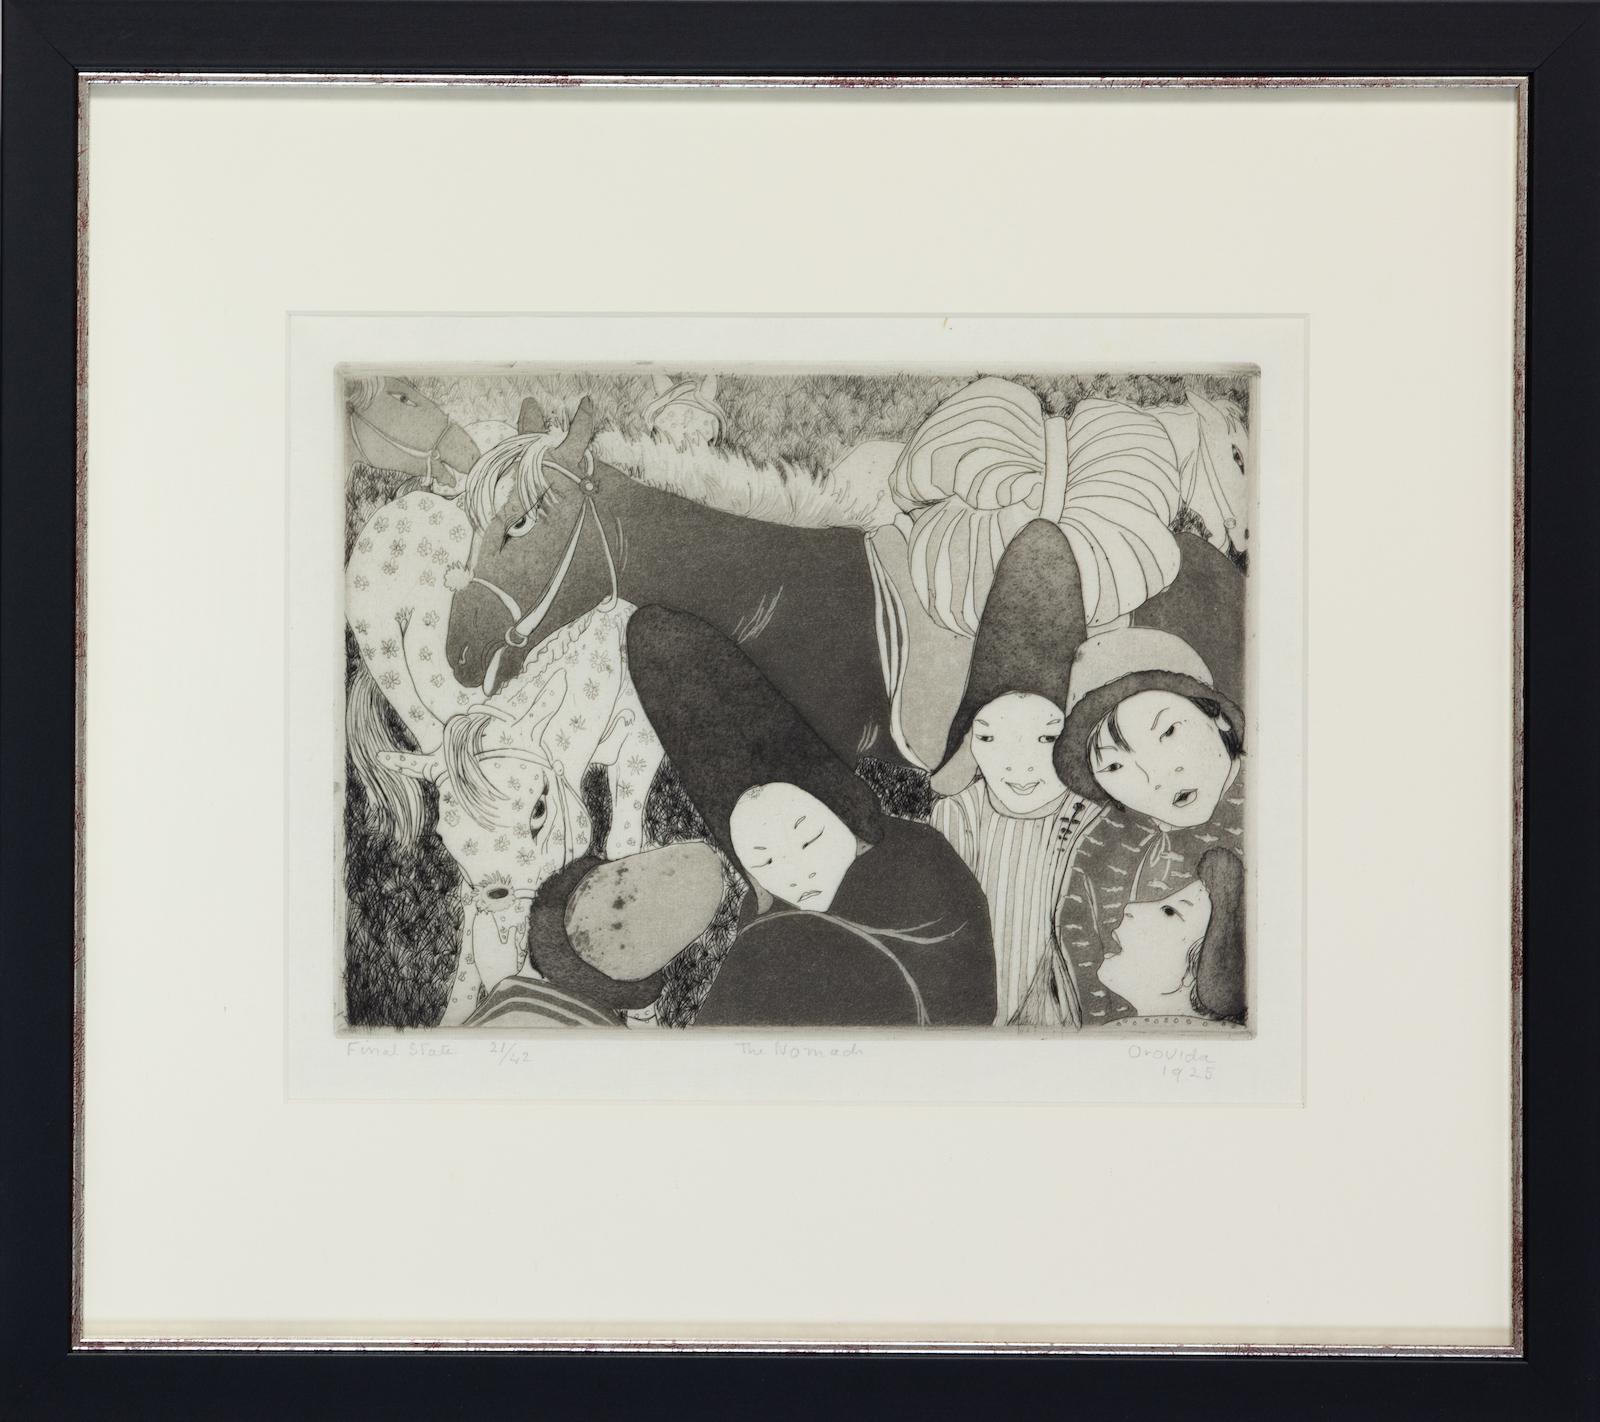 The Nomads by Orovida Pissarro (1893-1968)
Etching and aquatint, final state 21/42
27 x 41 cm (10 ⁵/₈ x 16 ¹/₈ inches)
Signed, Orovida, and dated 1925

Orovida was a gifted printmaker and worked with etching, engraving and lithography. Also an